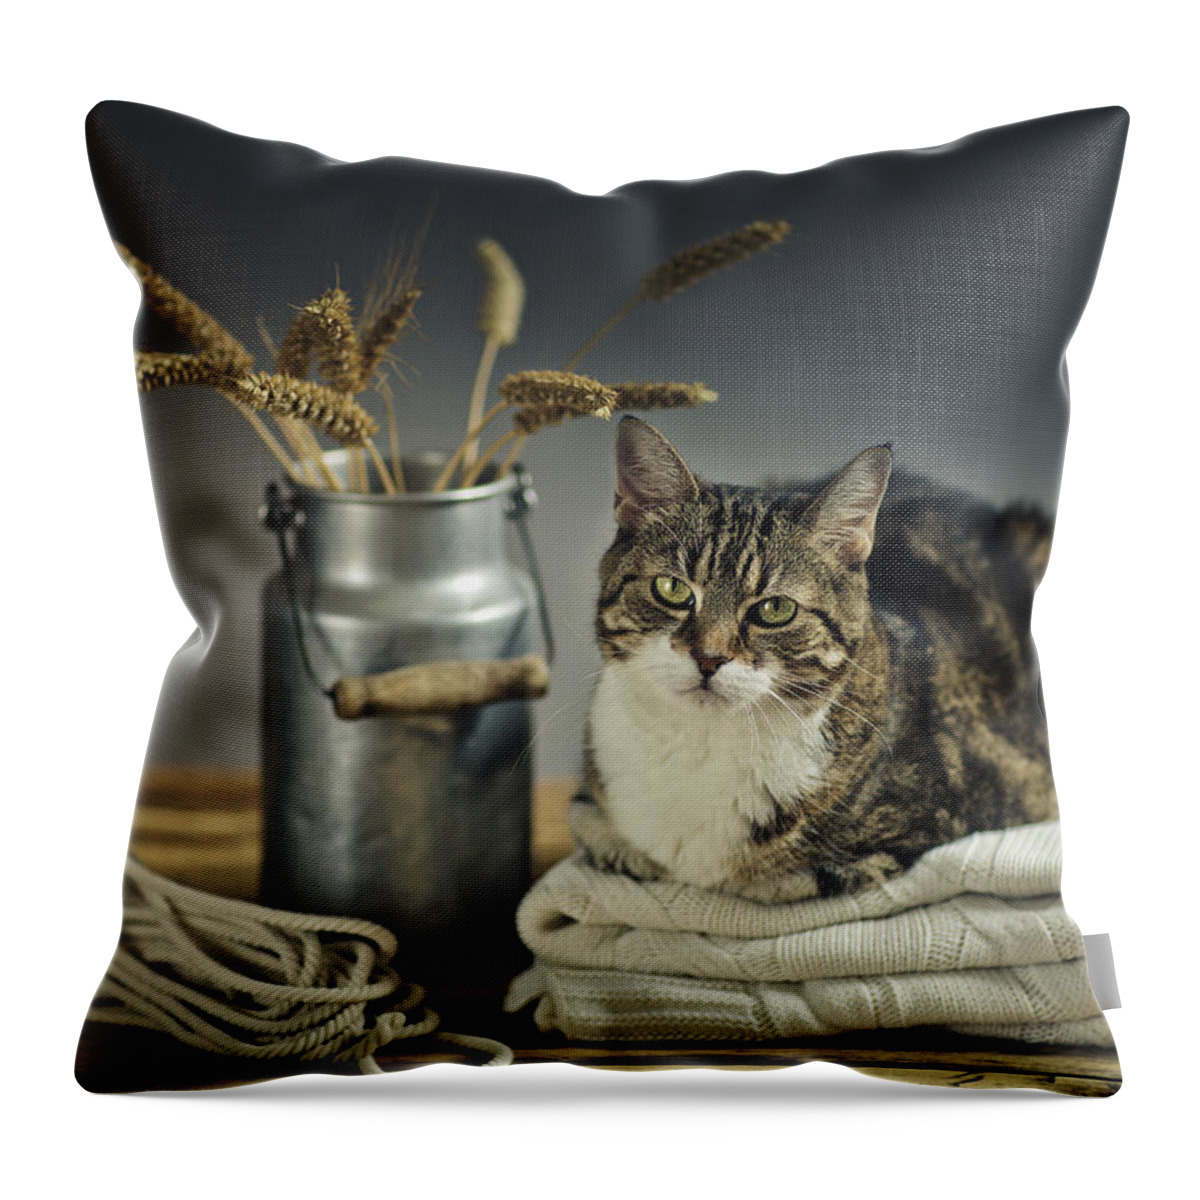 Cat Throw Pillow featuring the photograph Cat Portrait by Nailia Schwarz